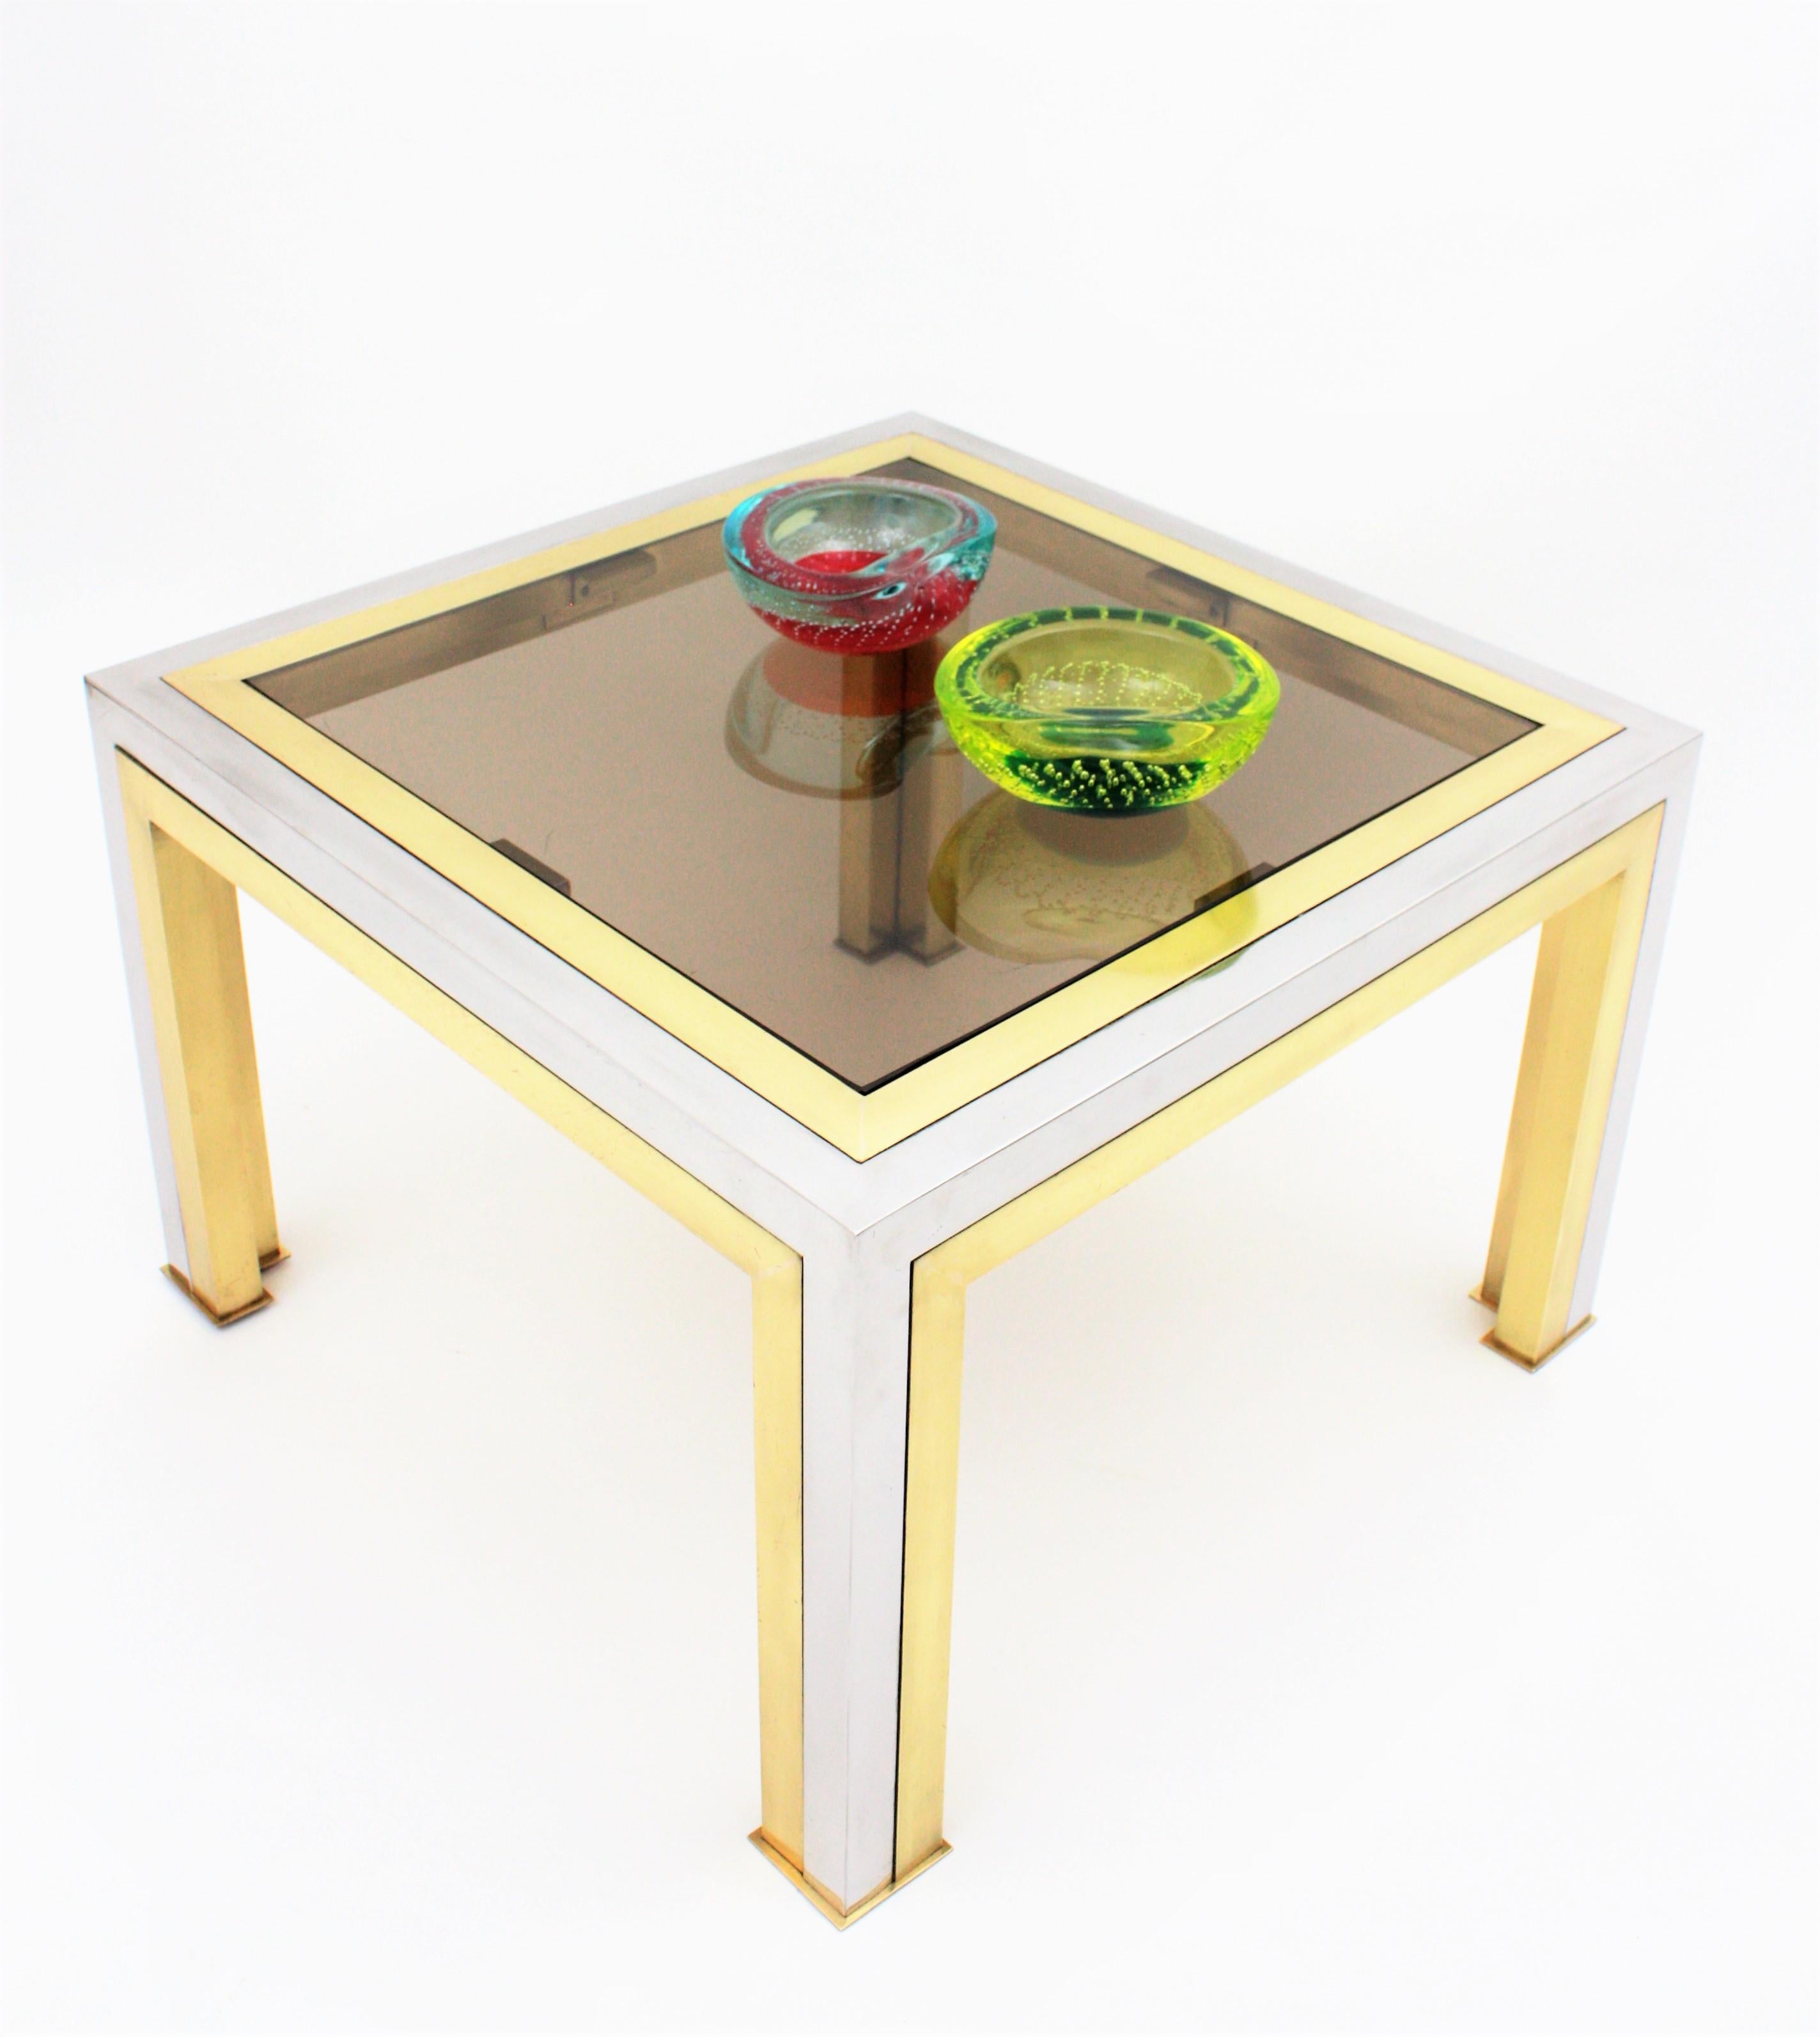 Polished Romeo Rega Coffee Table in Brass, Chromed Steel and Glass